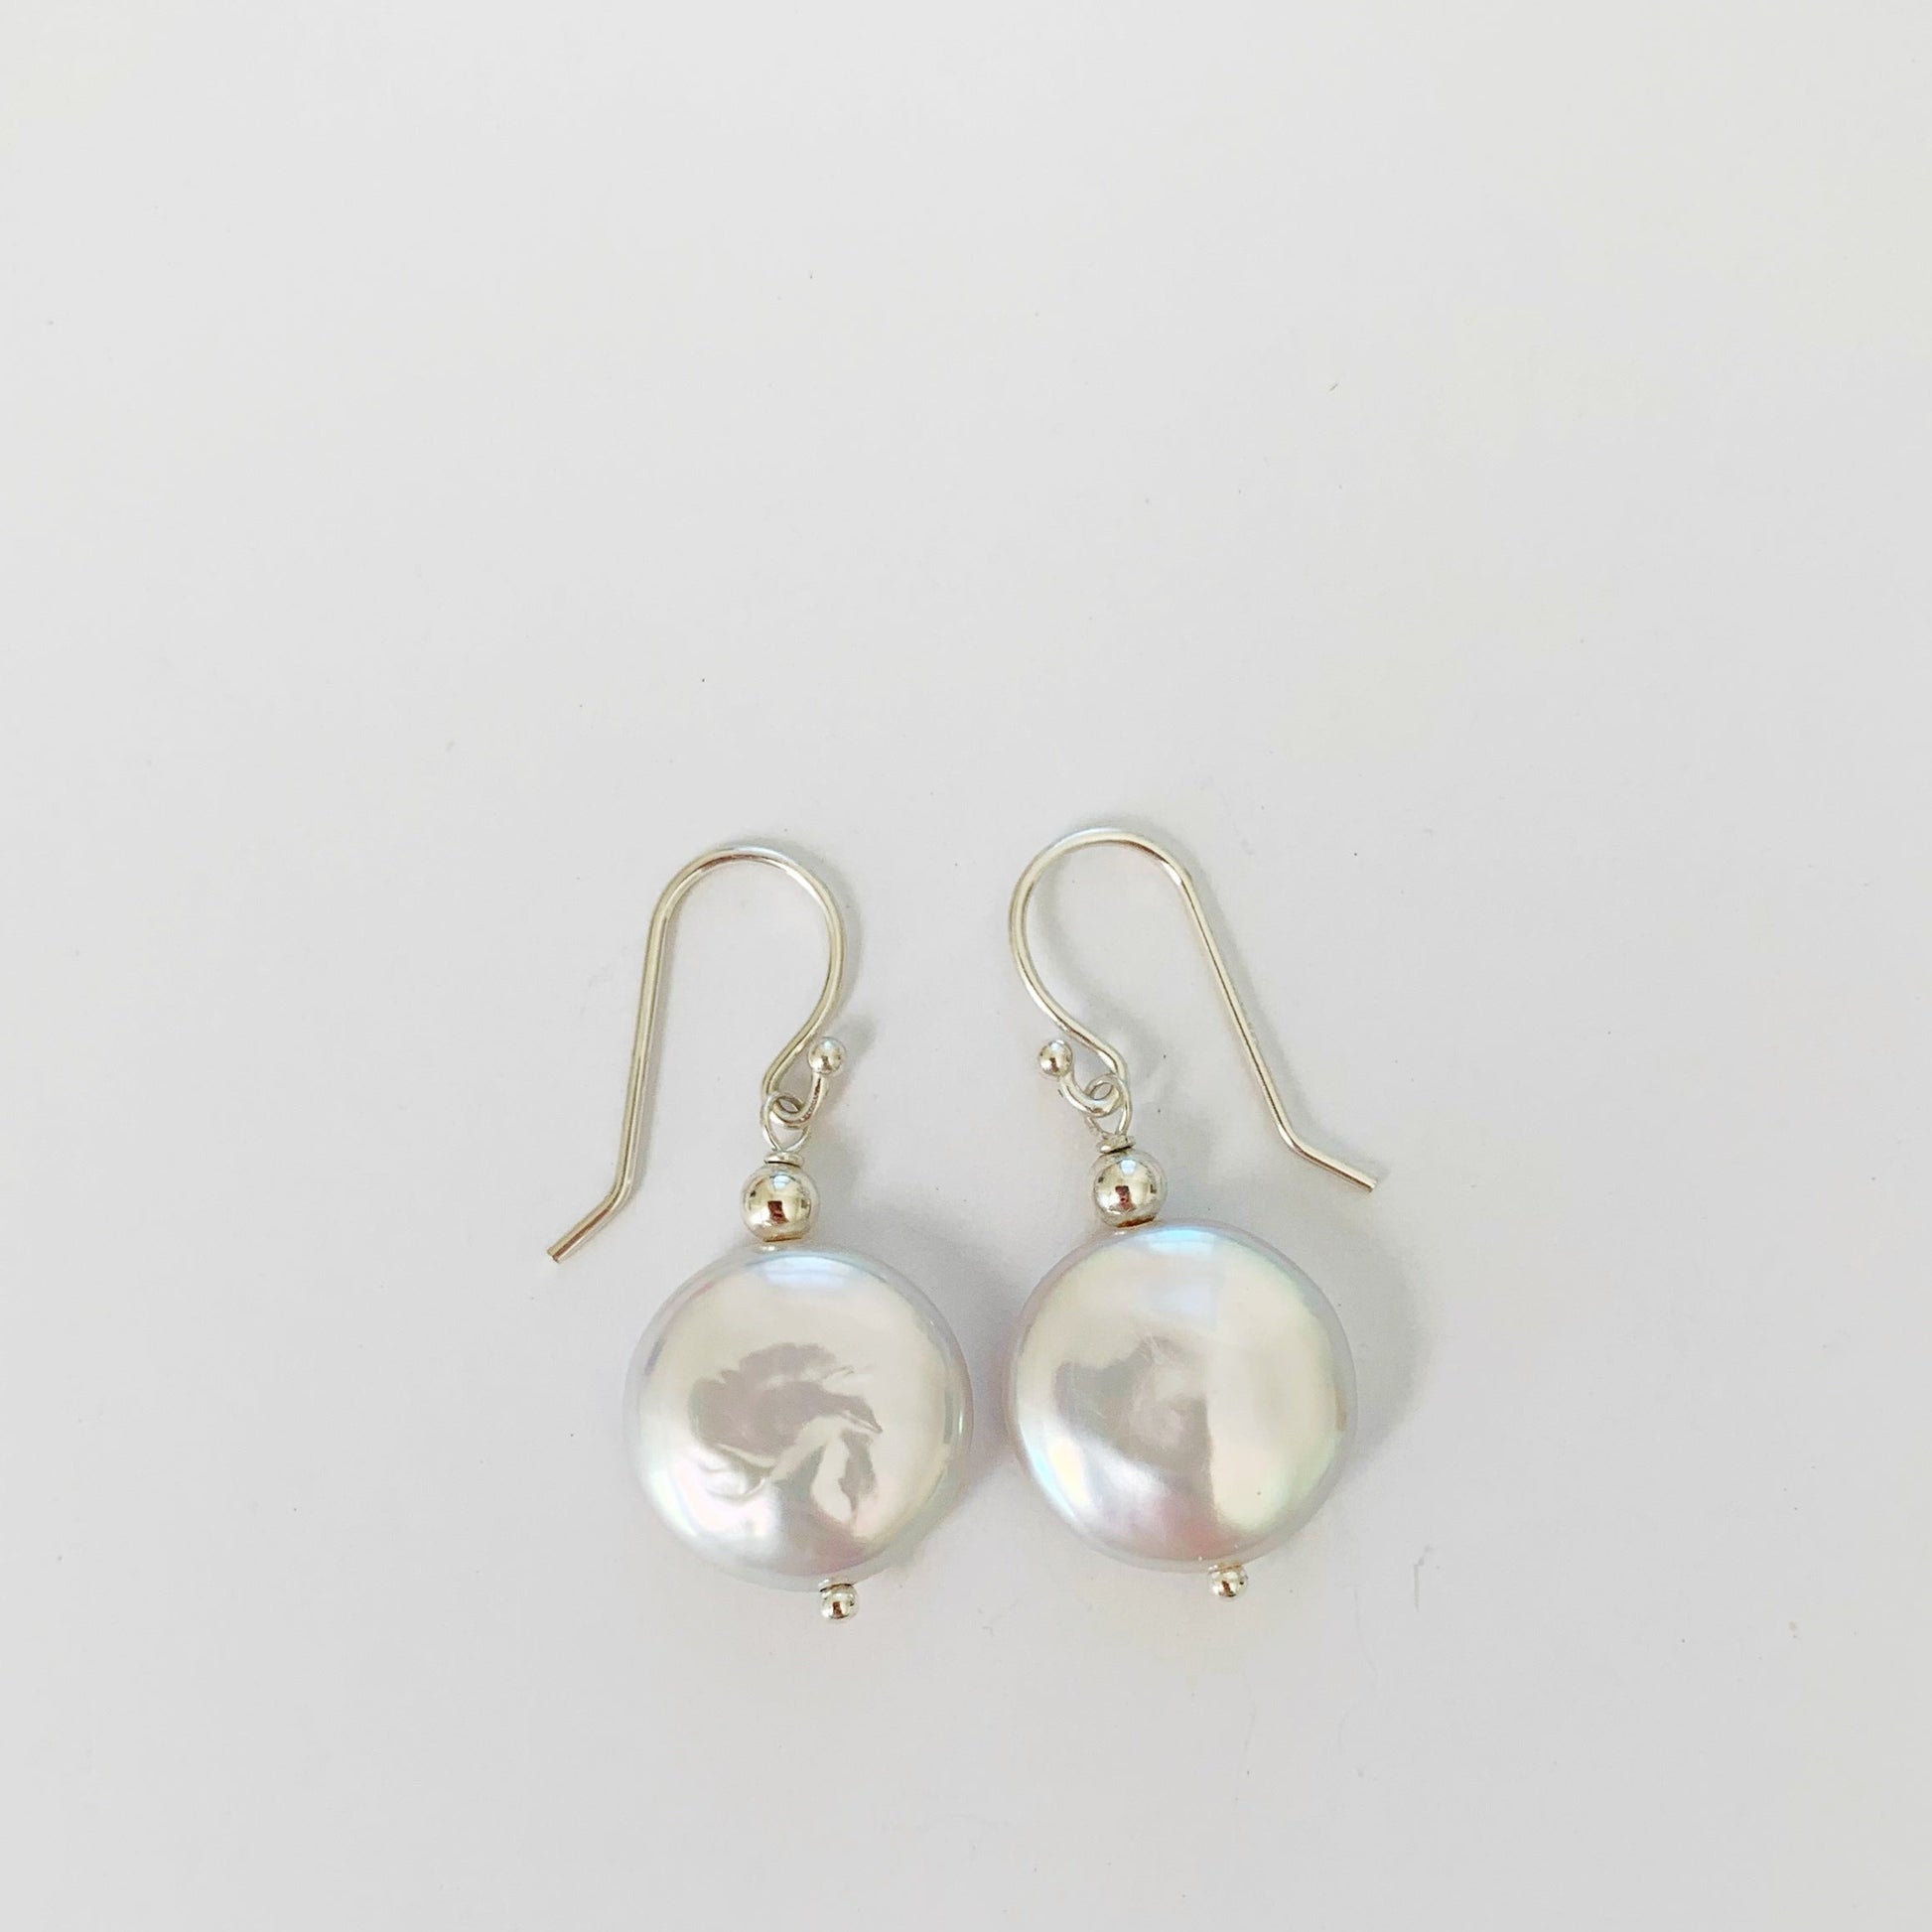 Newport Gala Sterling Silver Earrings with large freshwater coin pearl and sterling silver findings pictured on a white background